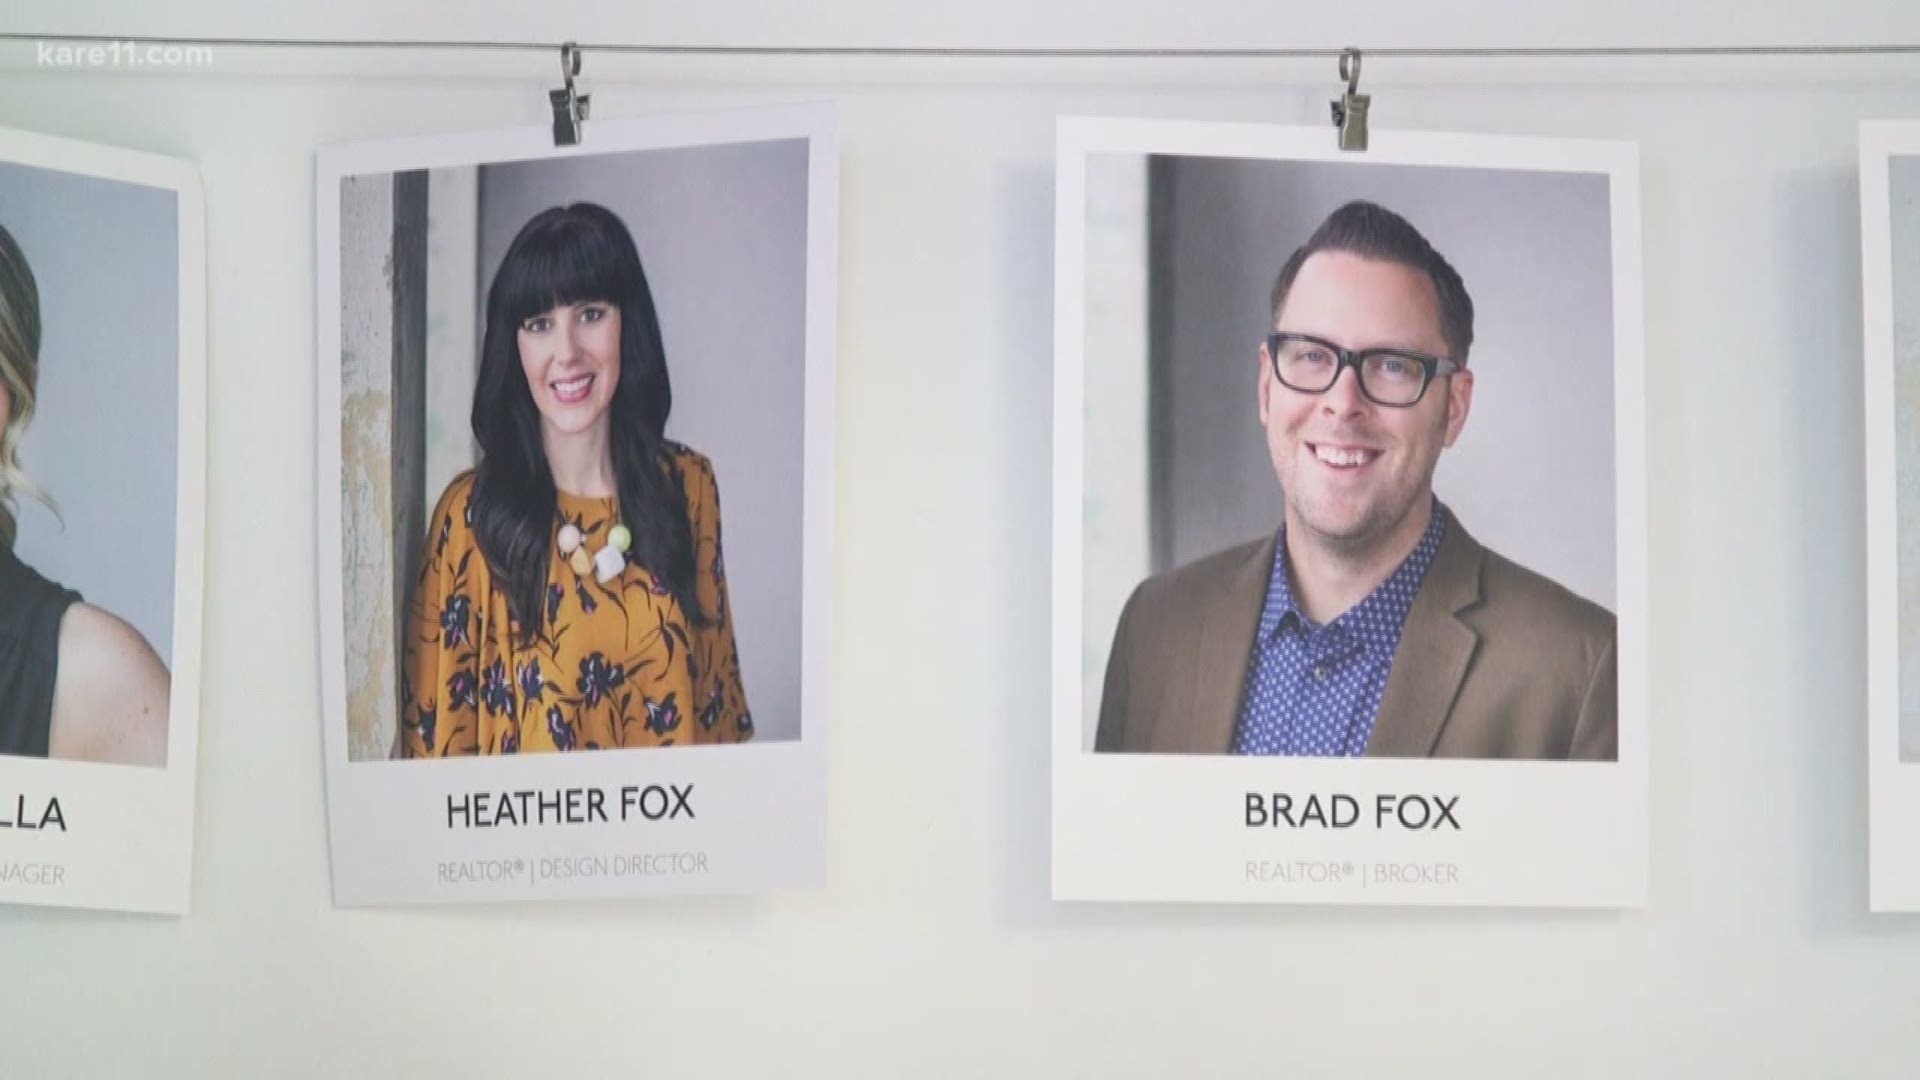 "When the production company for HGTV first reached out to us, we thought it was a prank."